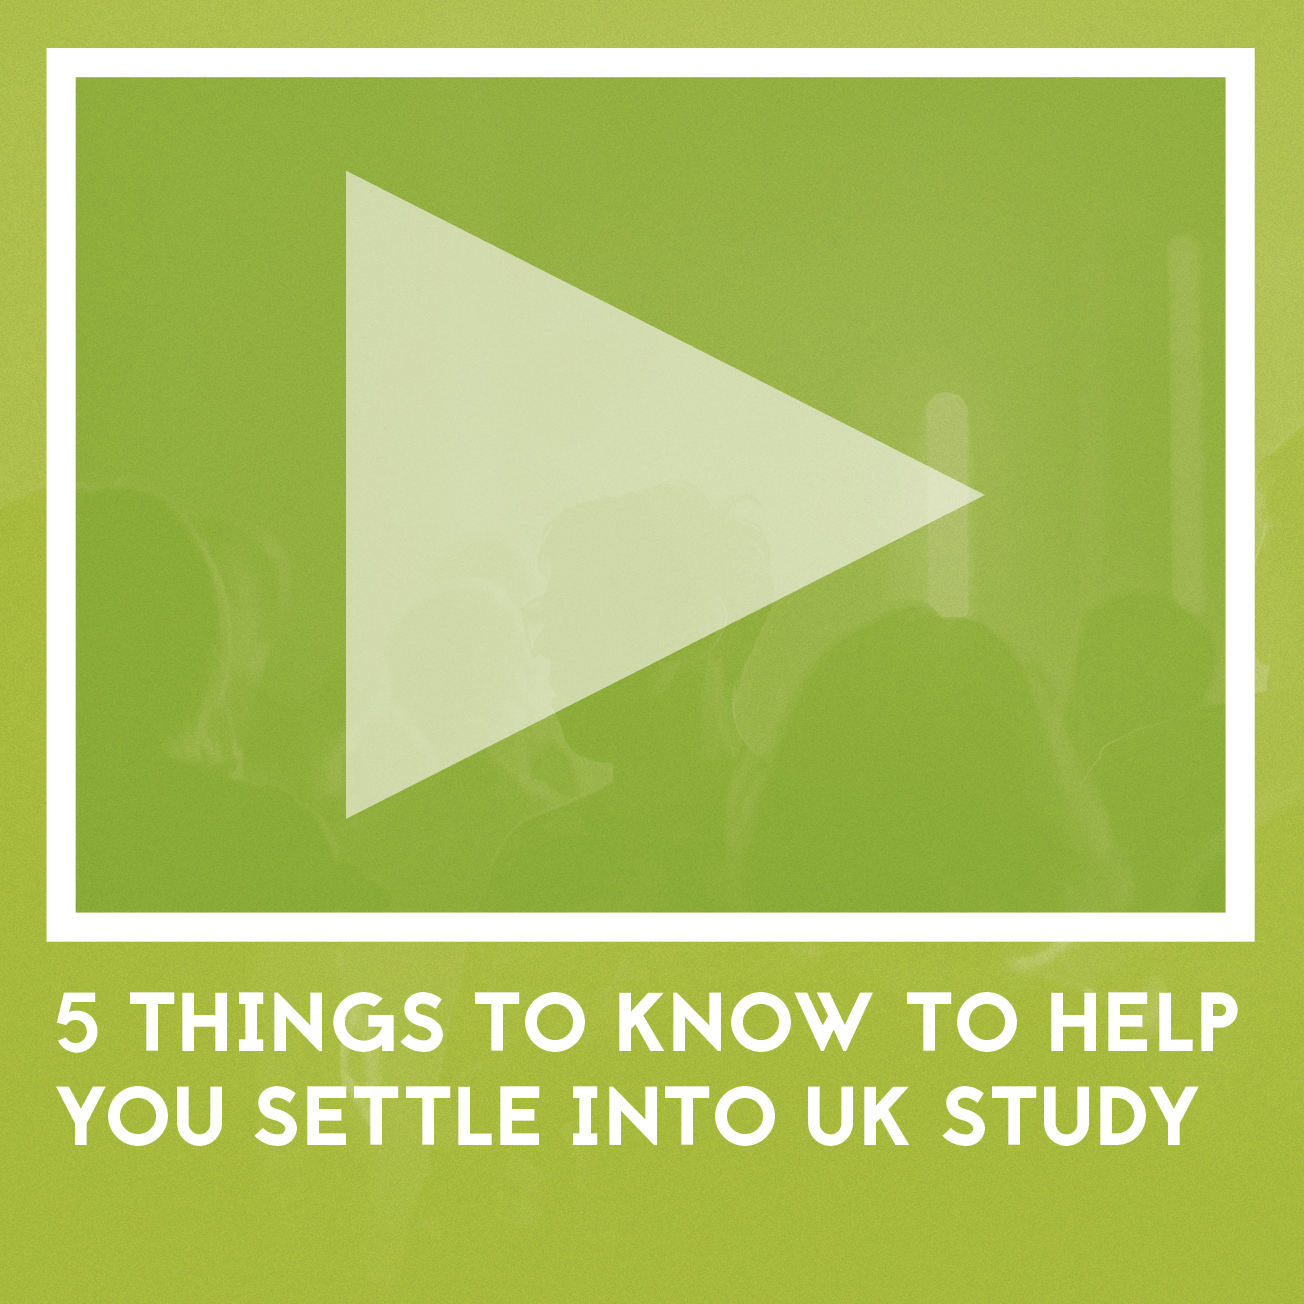 5 Things to know to help you settle into UK Study